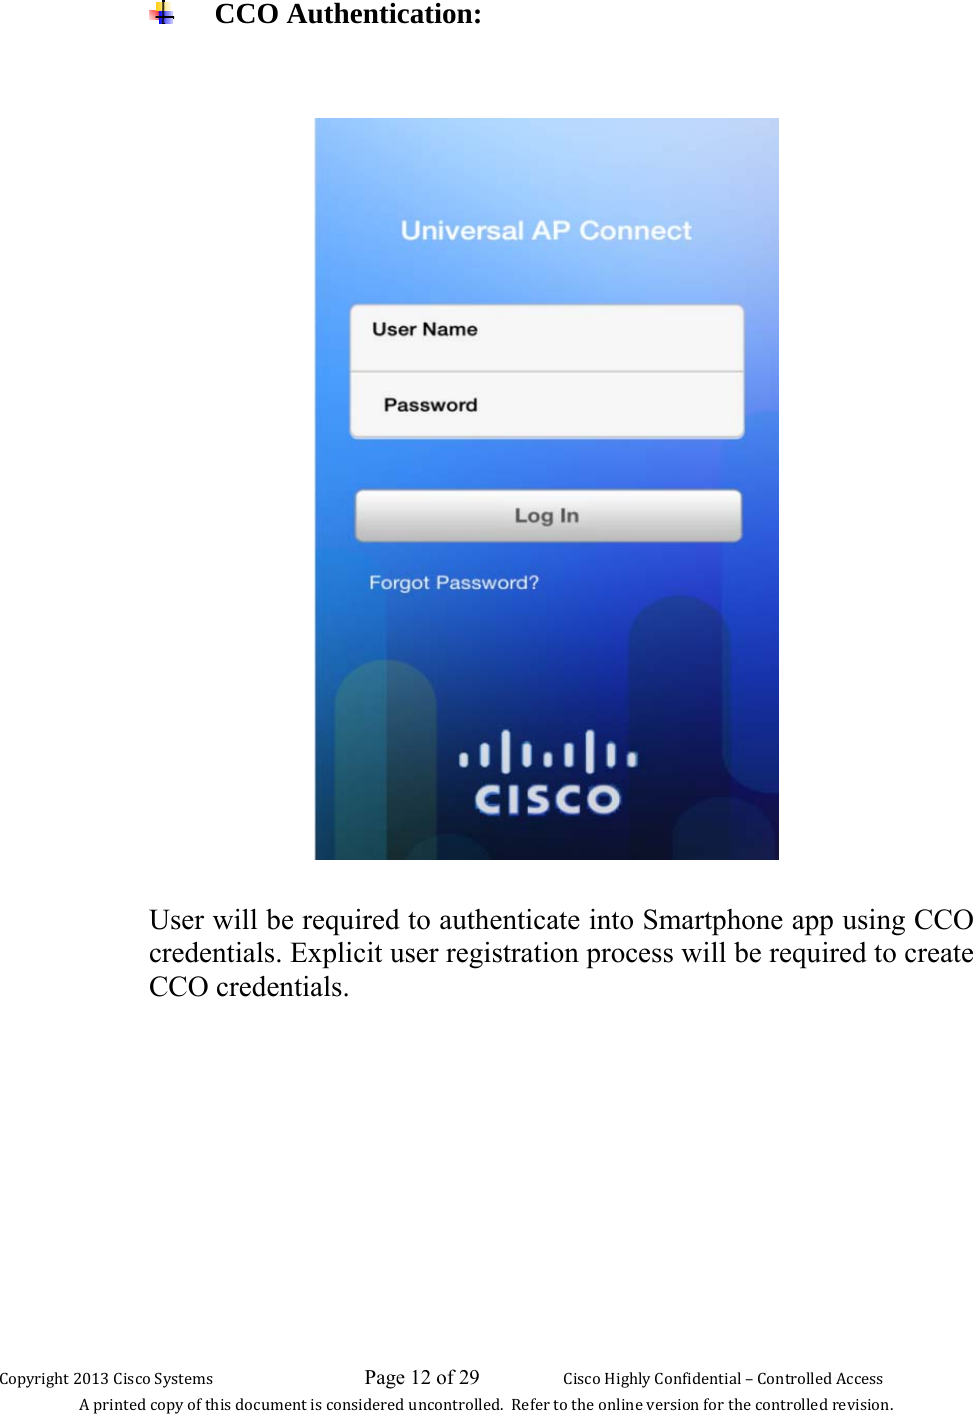 Copyright 2013 Cisco Systems                             Page 12 of 29                     Cisco Highly Confidential – Controlled Access A printed copy of this document is considered uncontrolled.  Refer to the online version for the controlled revision.  CCO Authentication:     User will be required to authenticate into Smartphone app using CCO credentials. Explicit user registration process will be required to create CCO credentials.         